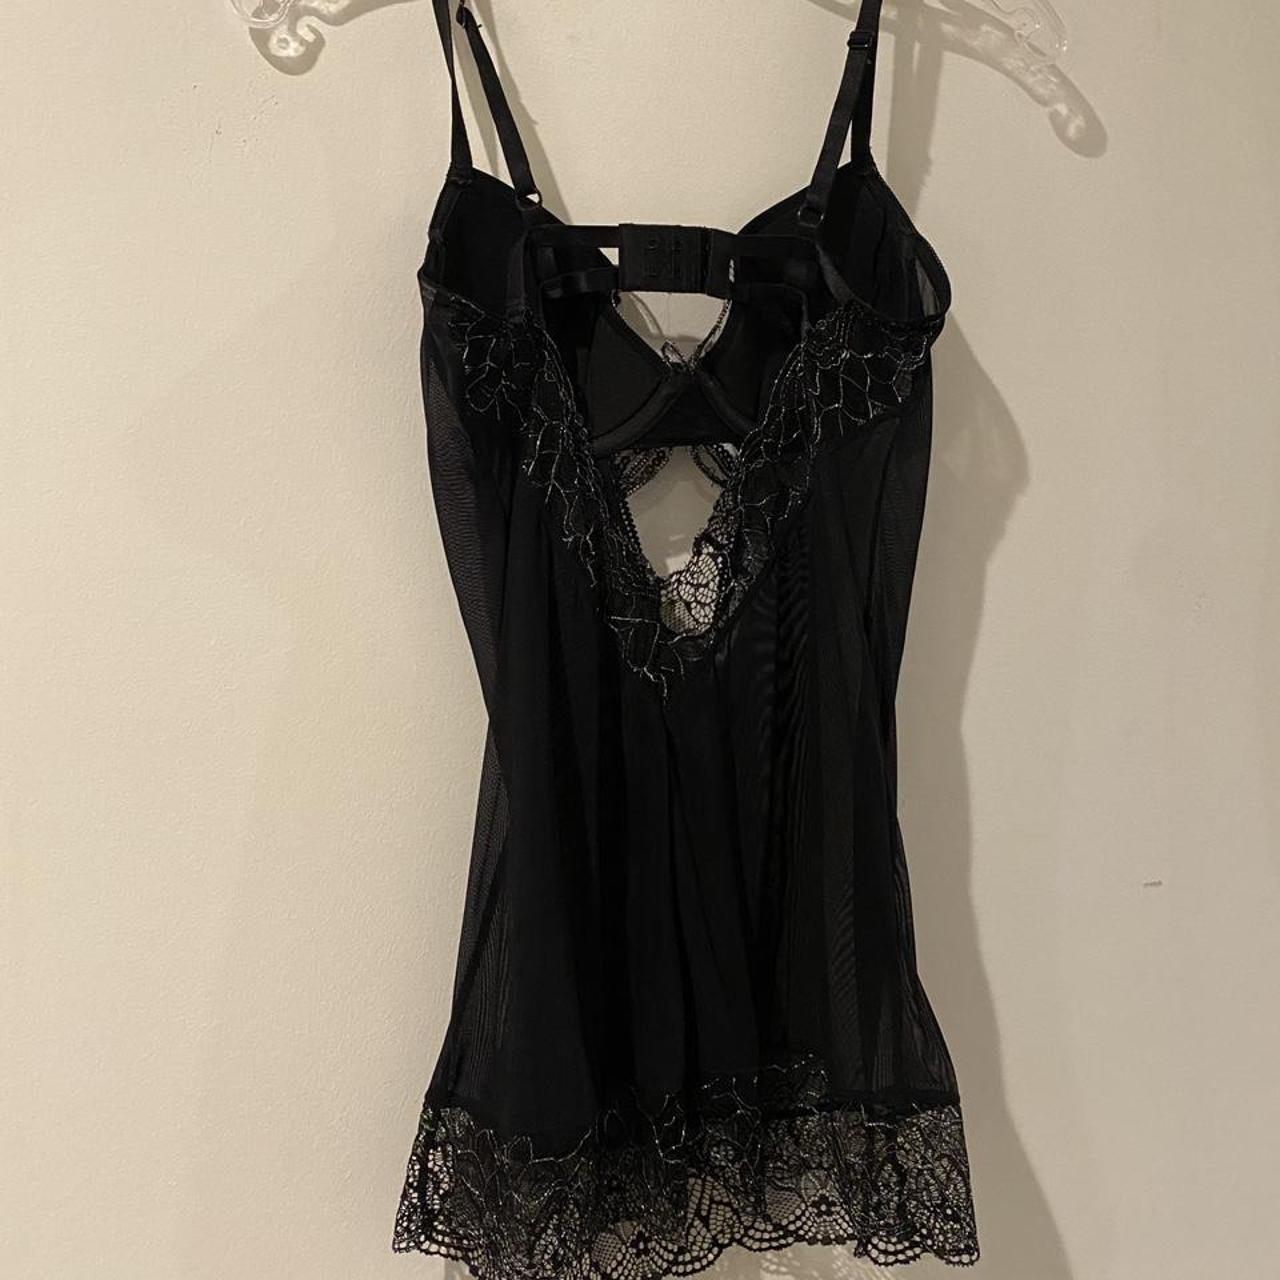 Frederick's of Hollywood Women's Black and Silver Nightwear (3)